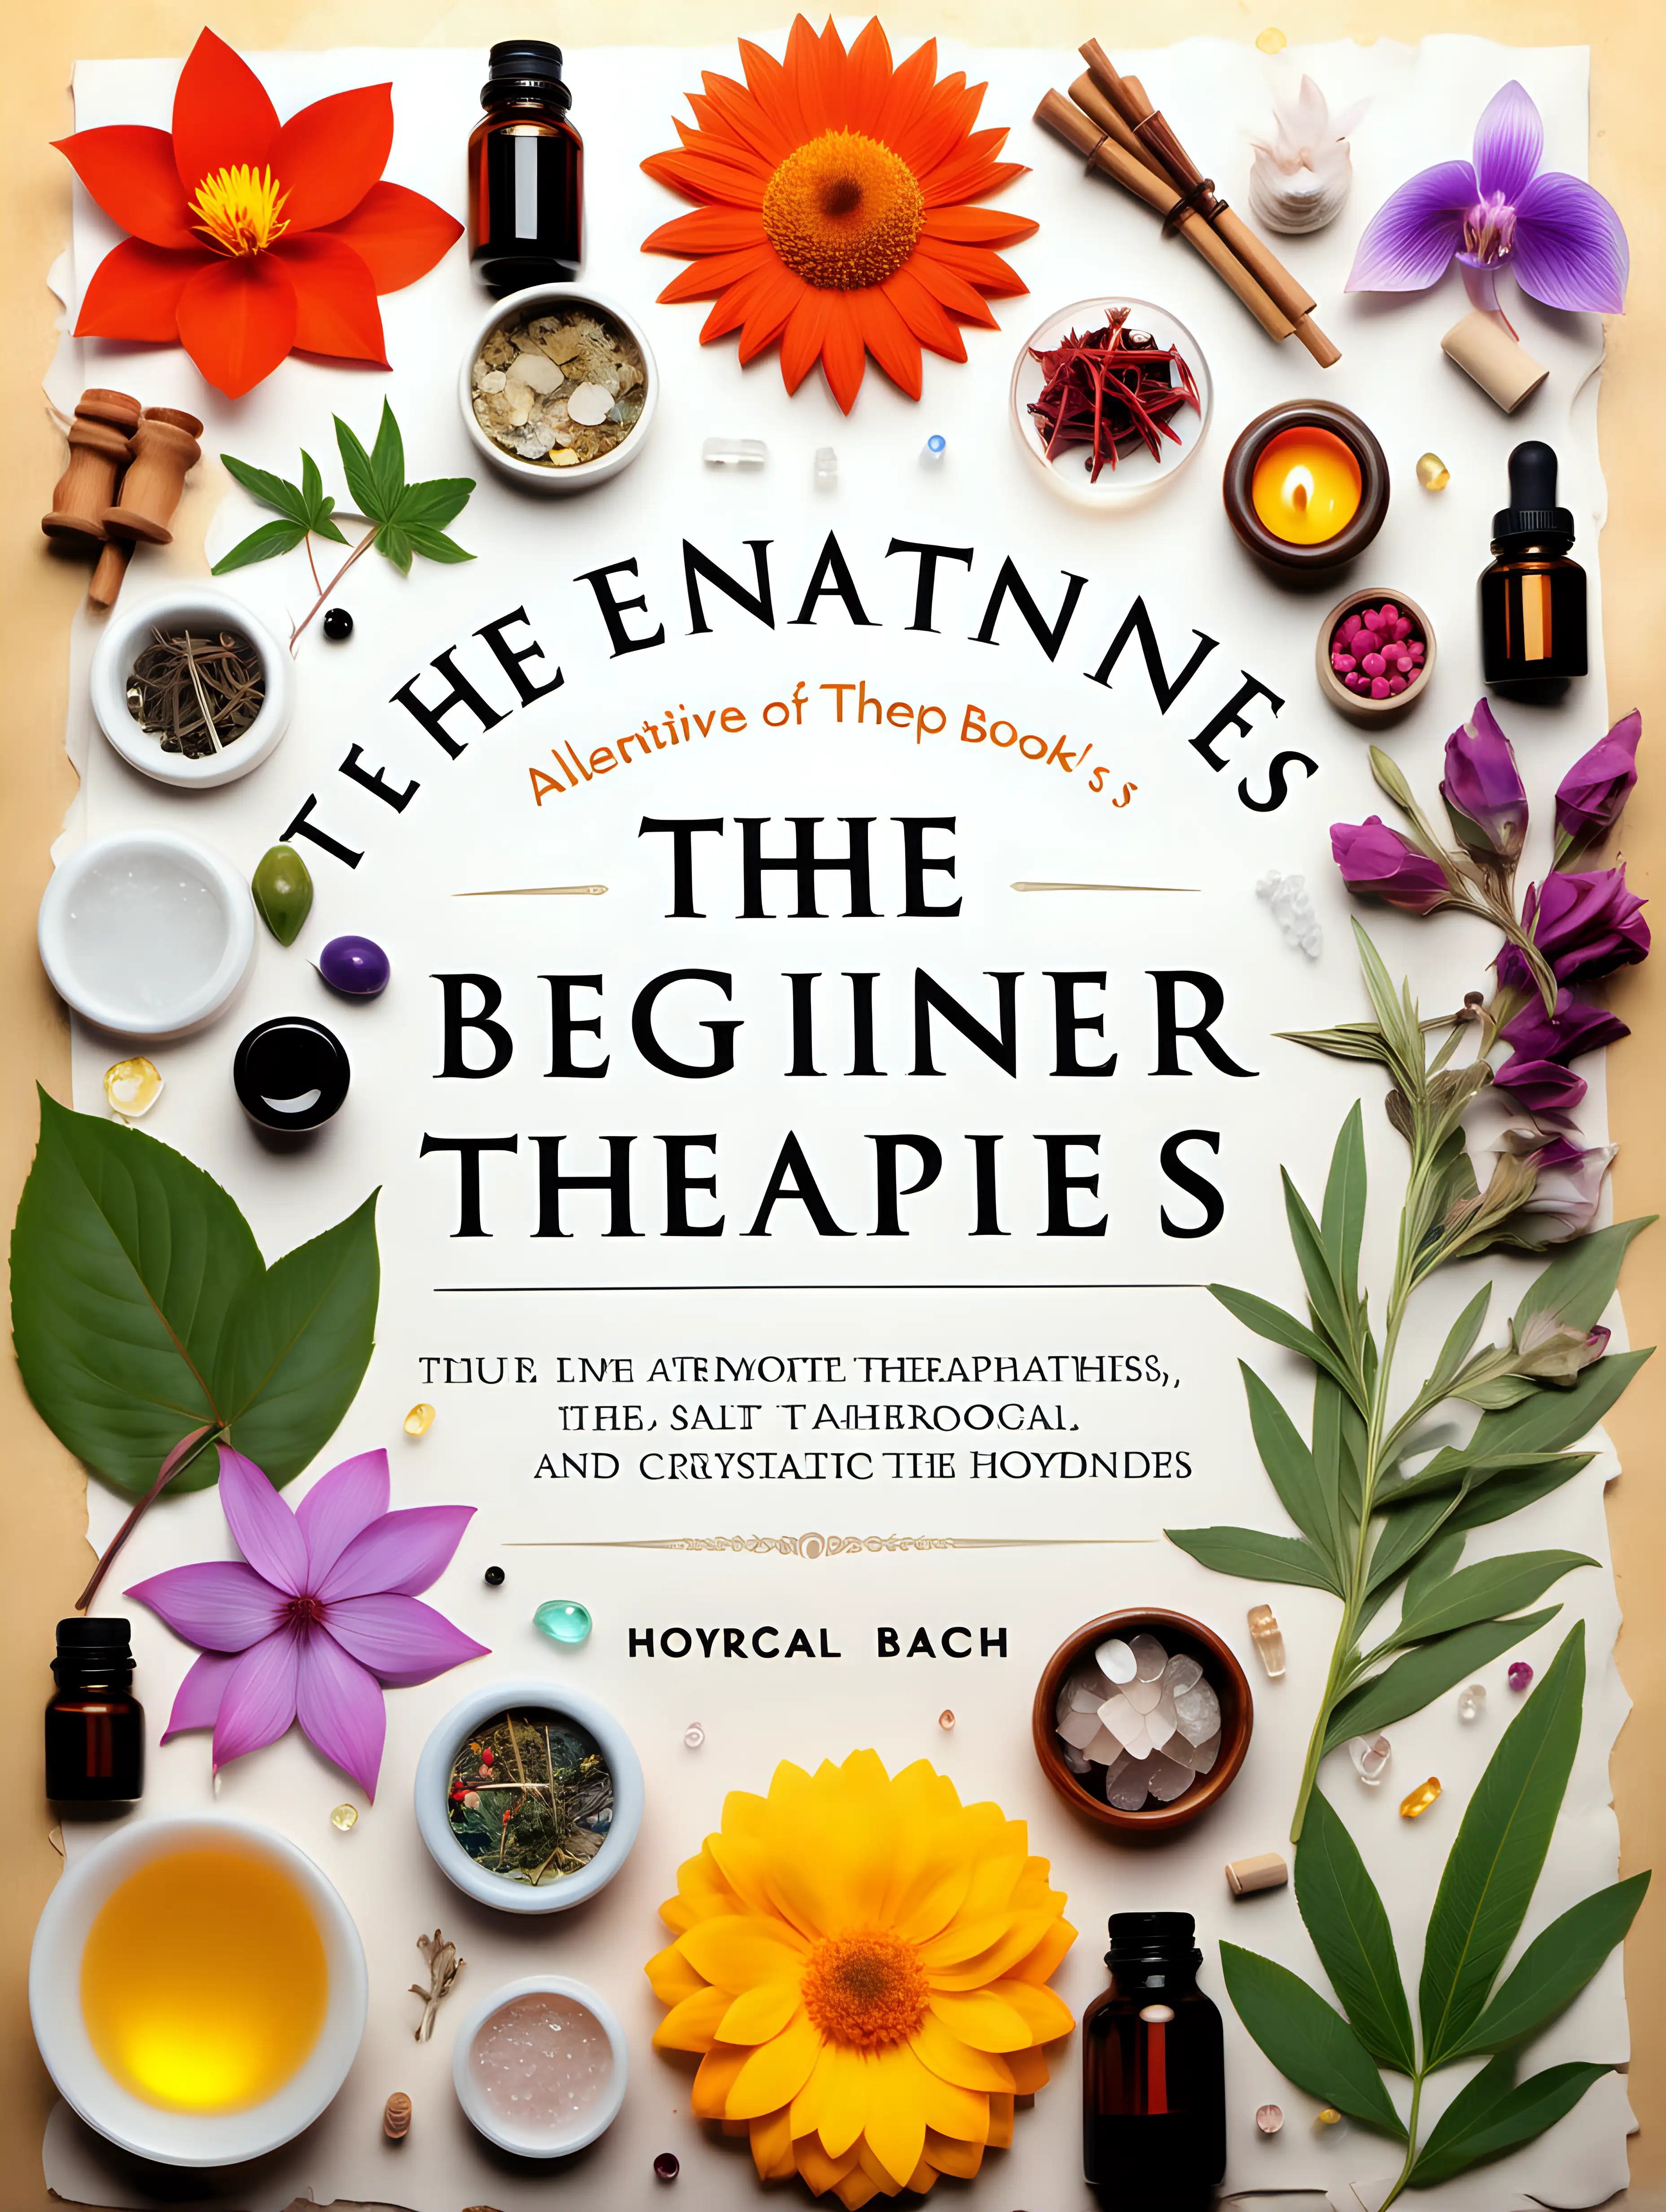 Create a book cover with a photorealistic collage image depicting icons of multiple alternative therapies such as aromatherapy, apitherapy, somatic therapy, herbalism, qi gong, hydrotherapy, bach flower remedies, salt therapy, crystal therapy, and color therapy. Please leave lots of room in the middle for the title and subtitle. The title is "The Beginner's Guide to Alternative Therapies"